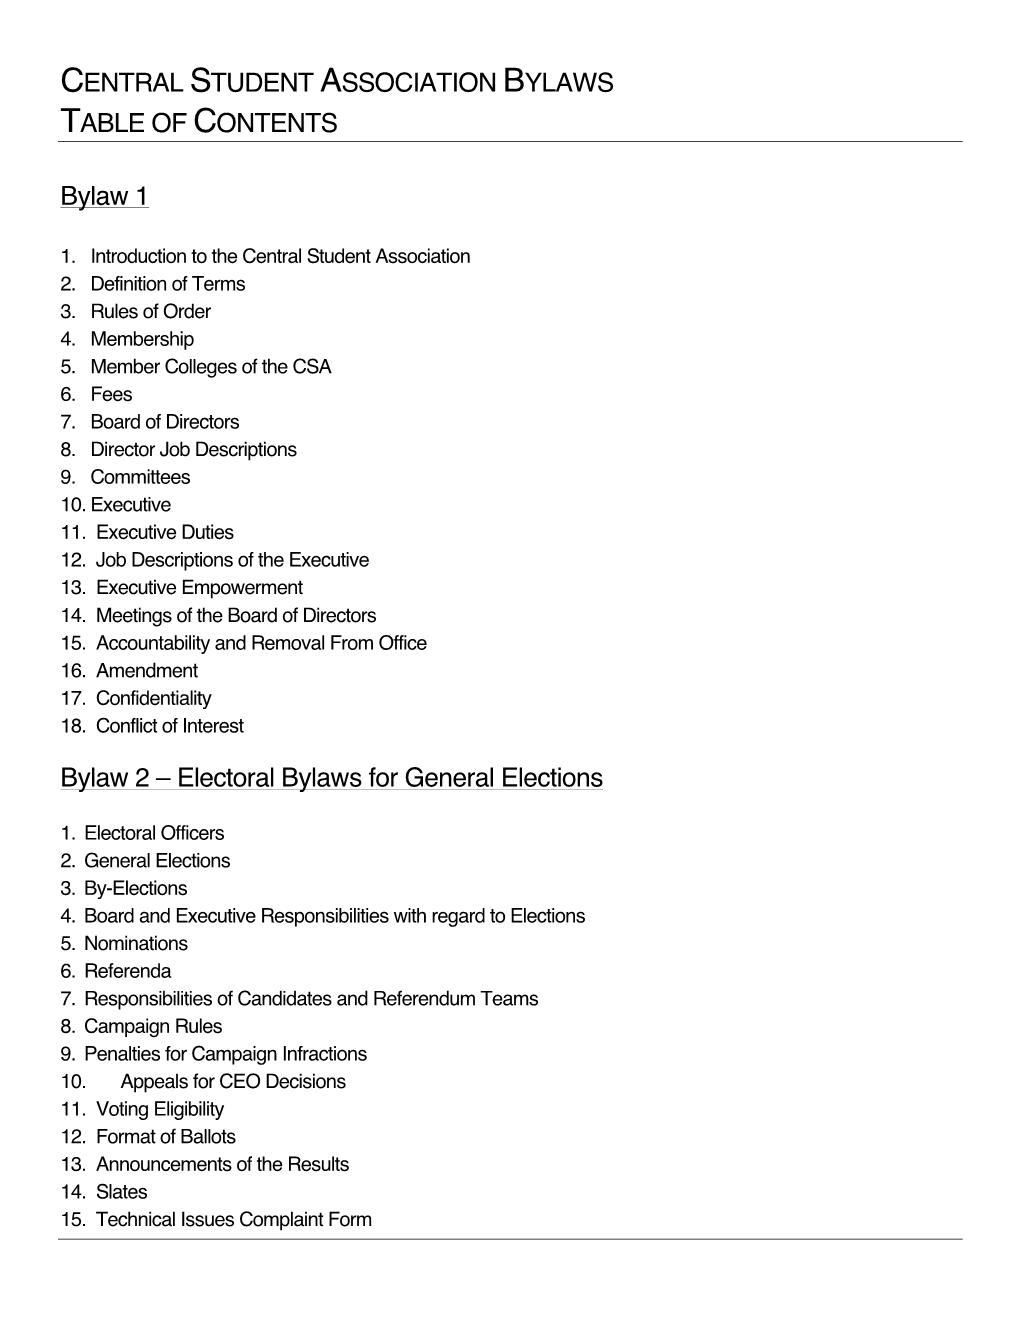 Central Student Association Bylaws Table of Contents